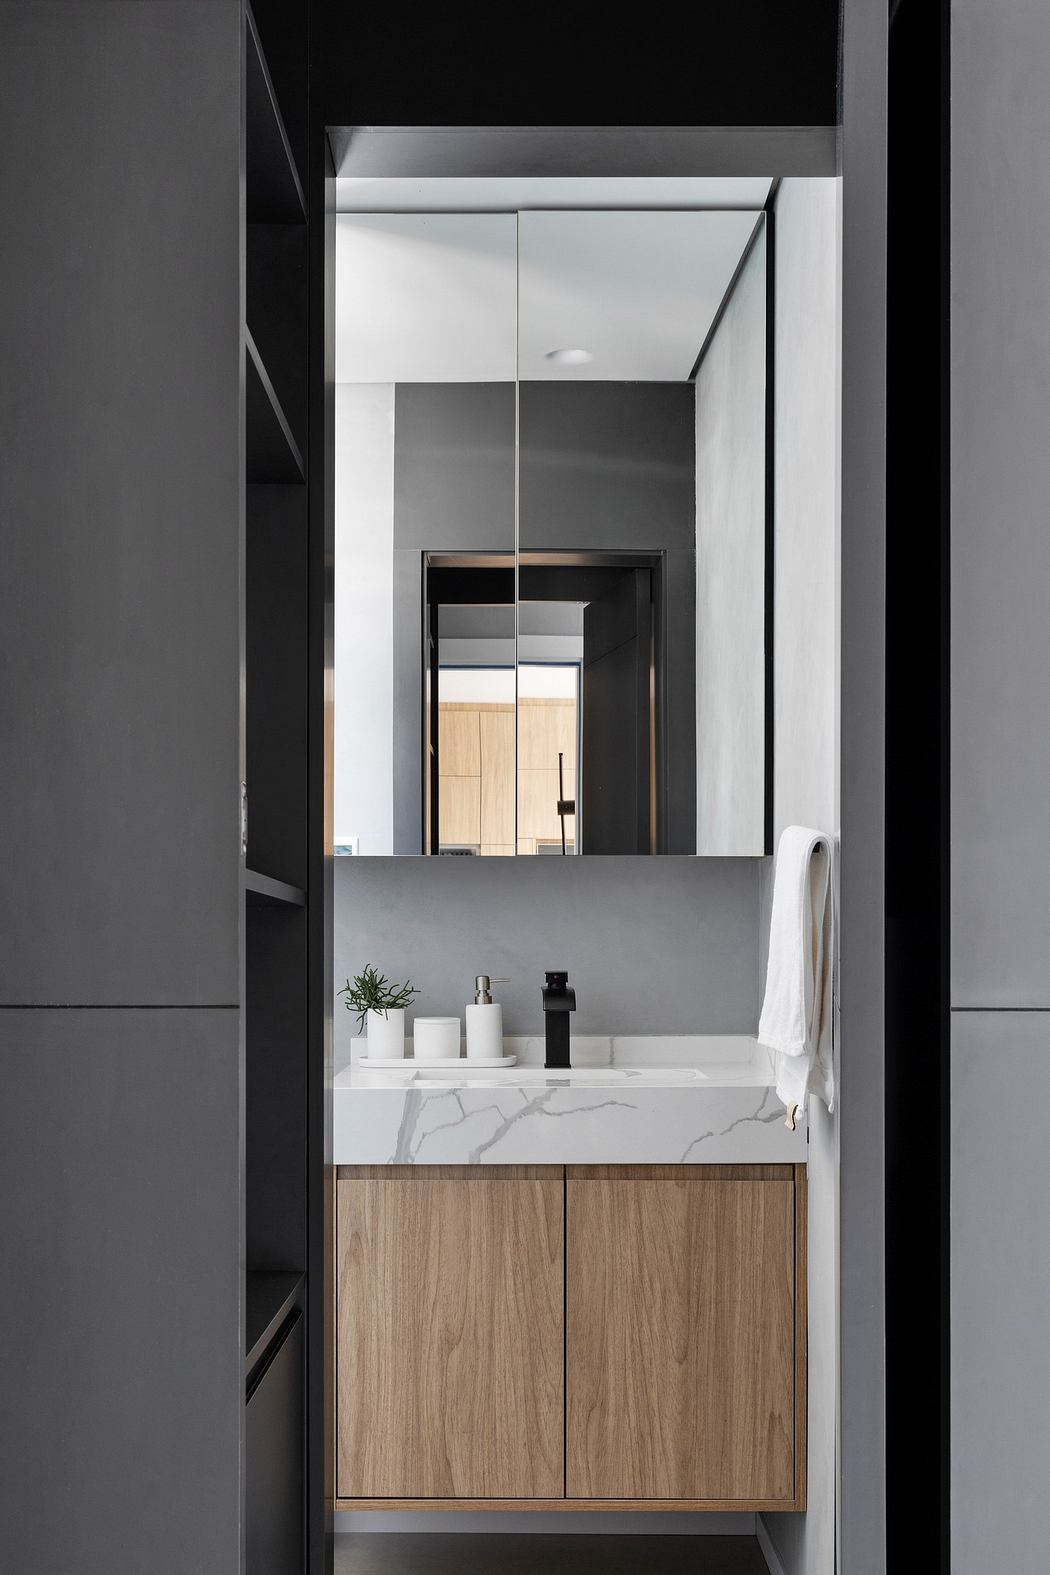 Contemporary bathroom with sleek wooden vanity and marble countertop.